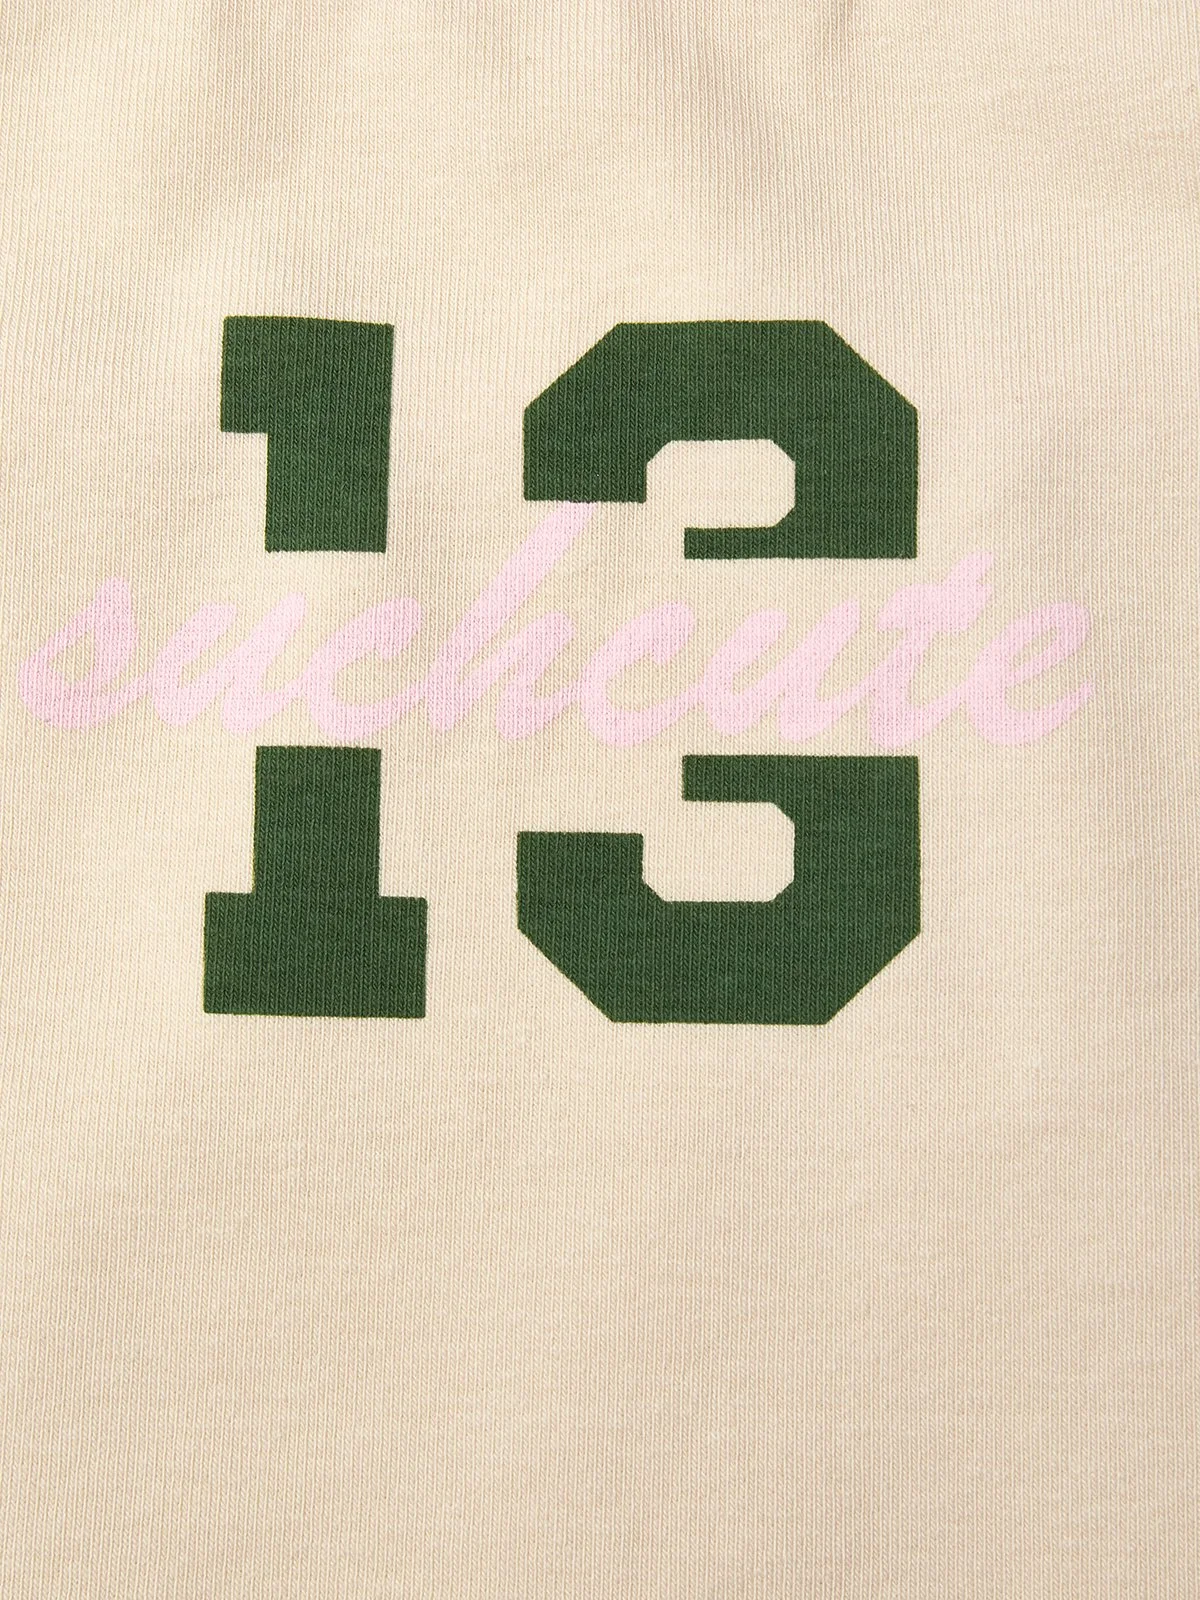 Jersey Text Letters Top With Skirt Two-Piece Set